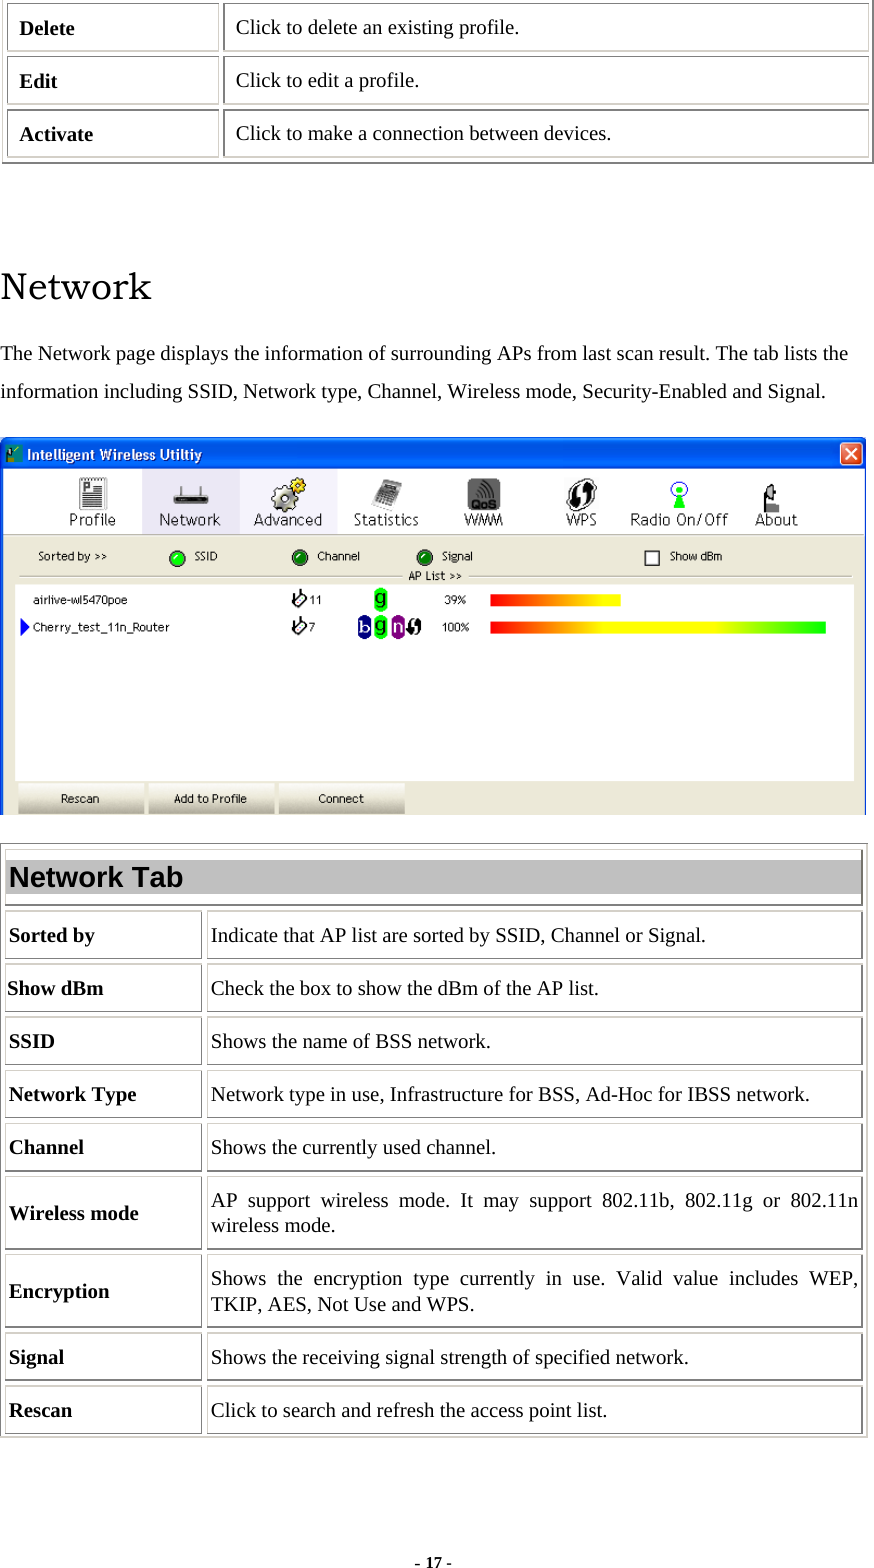  - 17 - Delete  Click to delete an existing profile. Edit  Click to edit a profile. Activate  Click to make a connection between devices.   Network  The Network page displays the information of surrounding APs from last scan result. The tab lists the information including SSID, Network type, Channel, Wireless mode, Security-Enabled and Signal.  Network Tab Sorted by Indicate that AP list are sorted by SSID, Channel or Signal. Show dBm  Check the box to show the dBm of the AP list. SSID  Shows the name of BSS network. Network Type Network type in use, Infrastructure for BSS, Ad-Hoc for IBSS network. Channel  Shows the currently used channel. Wireless mode  AP support wireless mode. It may support 802.11b, 802.11g or 802.11n wireless mode. Encryption  Shows the encryption type currently in use. Valid value includes WEP, TKIP, AES, Not Use and WPS. Signal  Shows the receiving signal strength of specified network. Rescan  Click to search and refresh the access point list. 